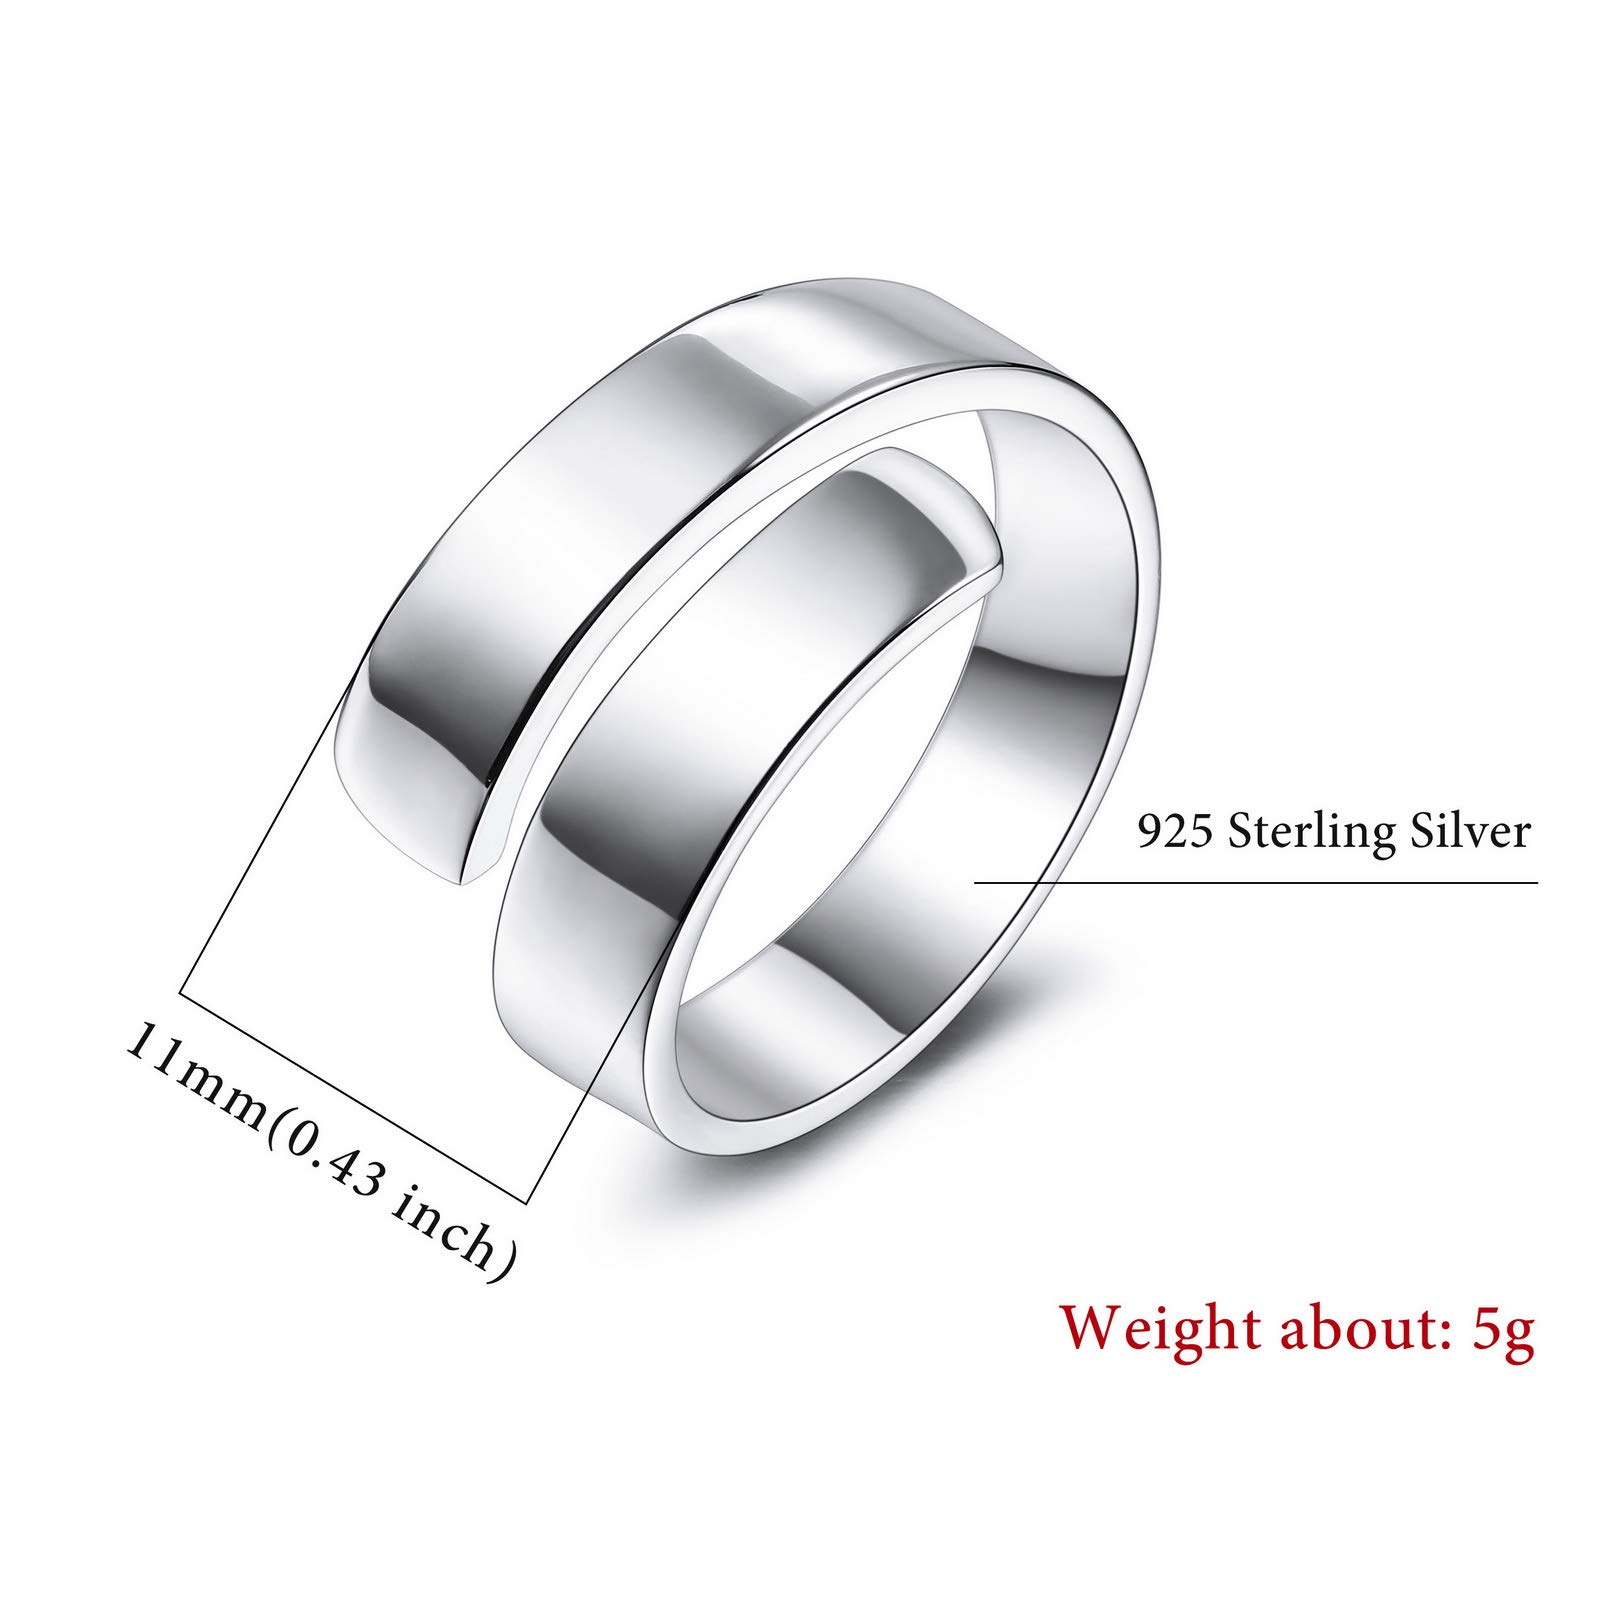 VIBOOS Personalized 925 Sterling Silver Spiral Twist Ring Engraving Name/Date for Women Girl Best Friend Customized Birthstones Adjustable Open Wrap Band Wedding Engagement Promise Ring